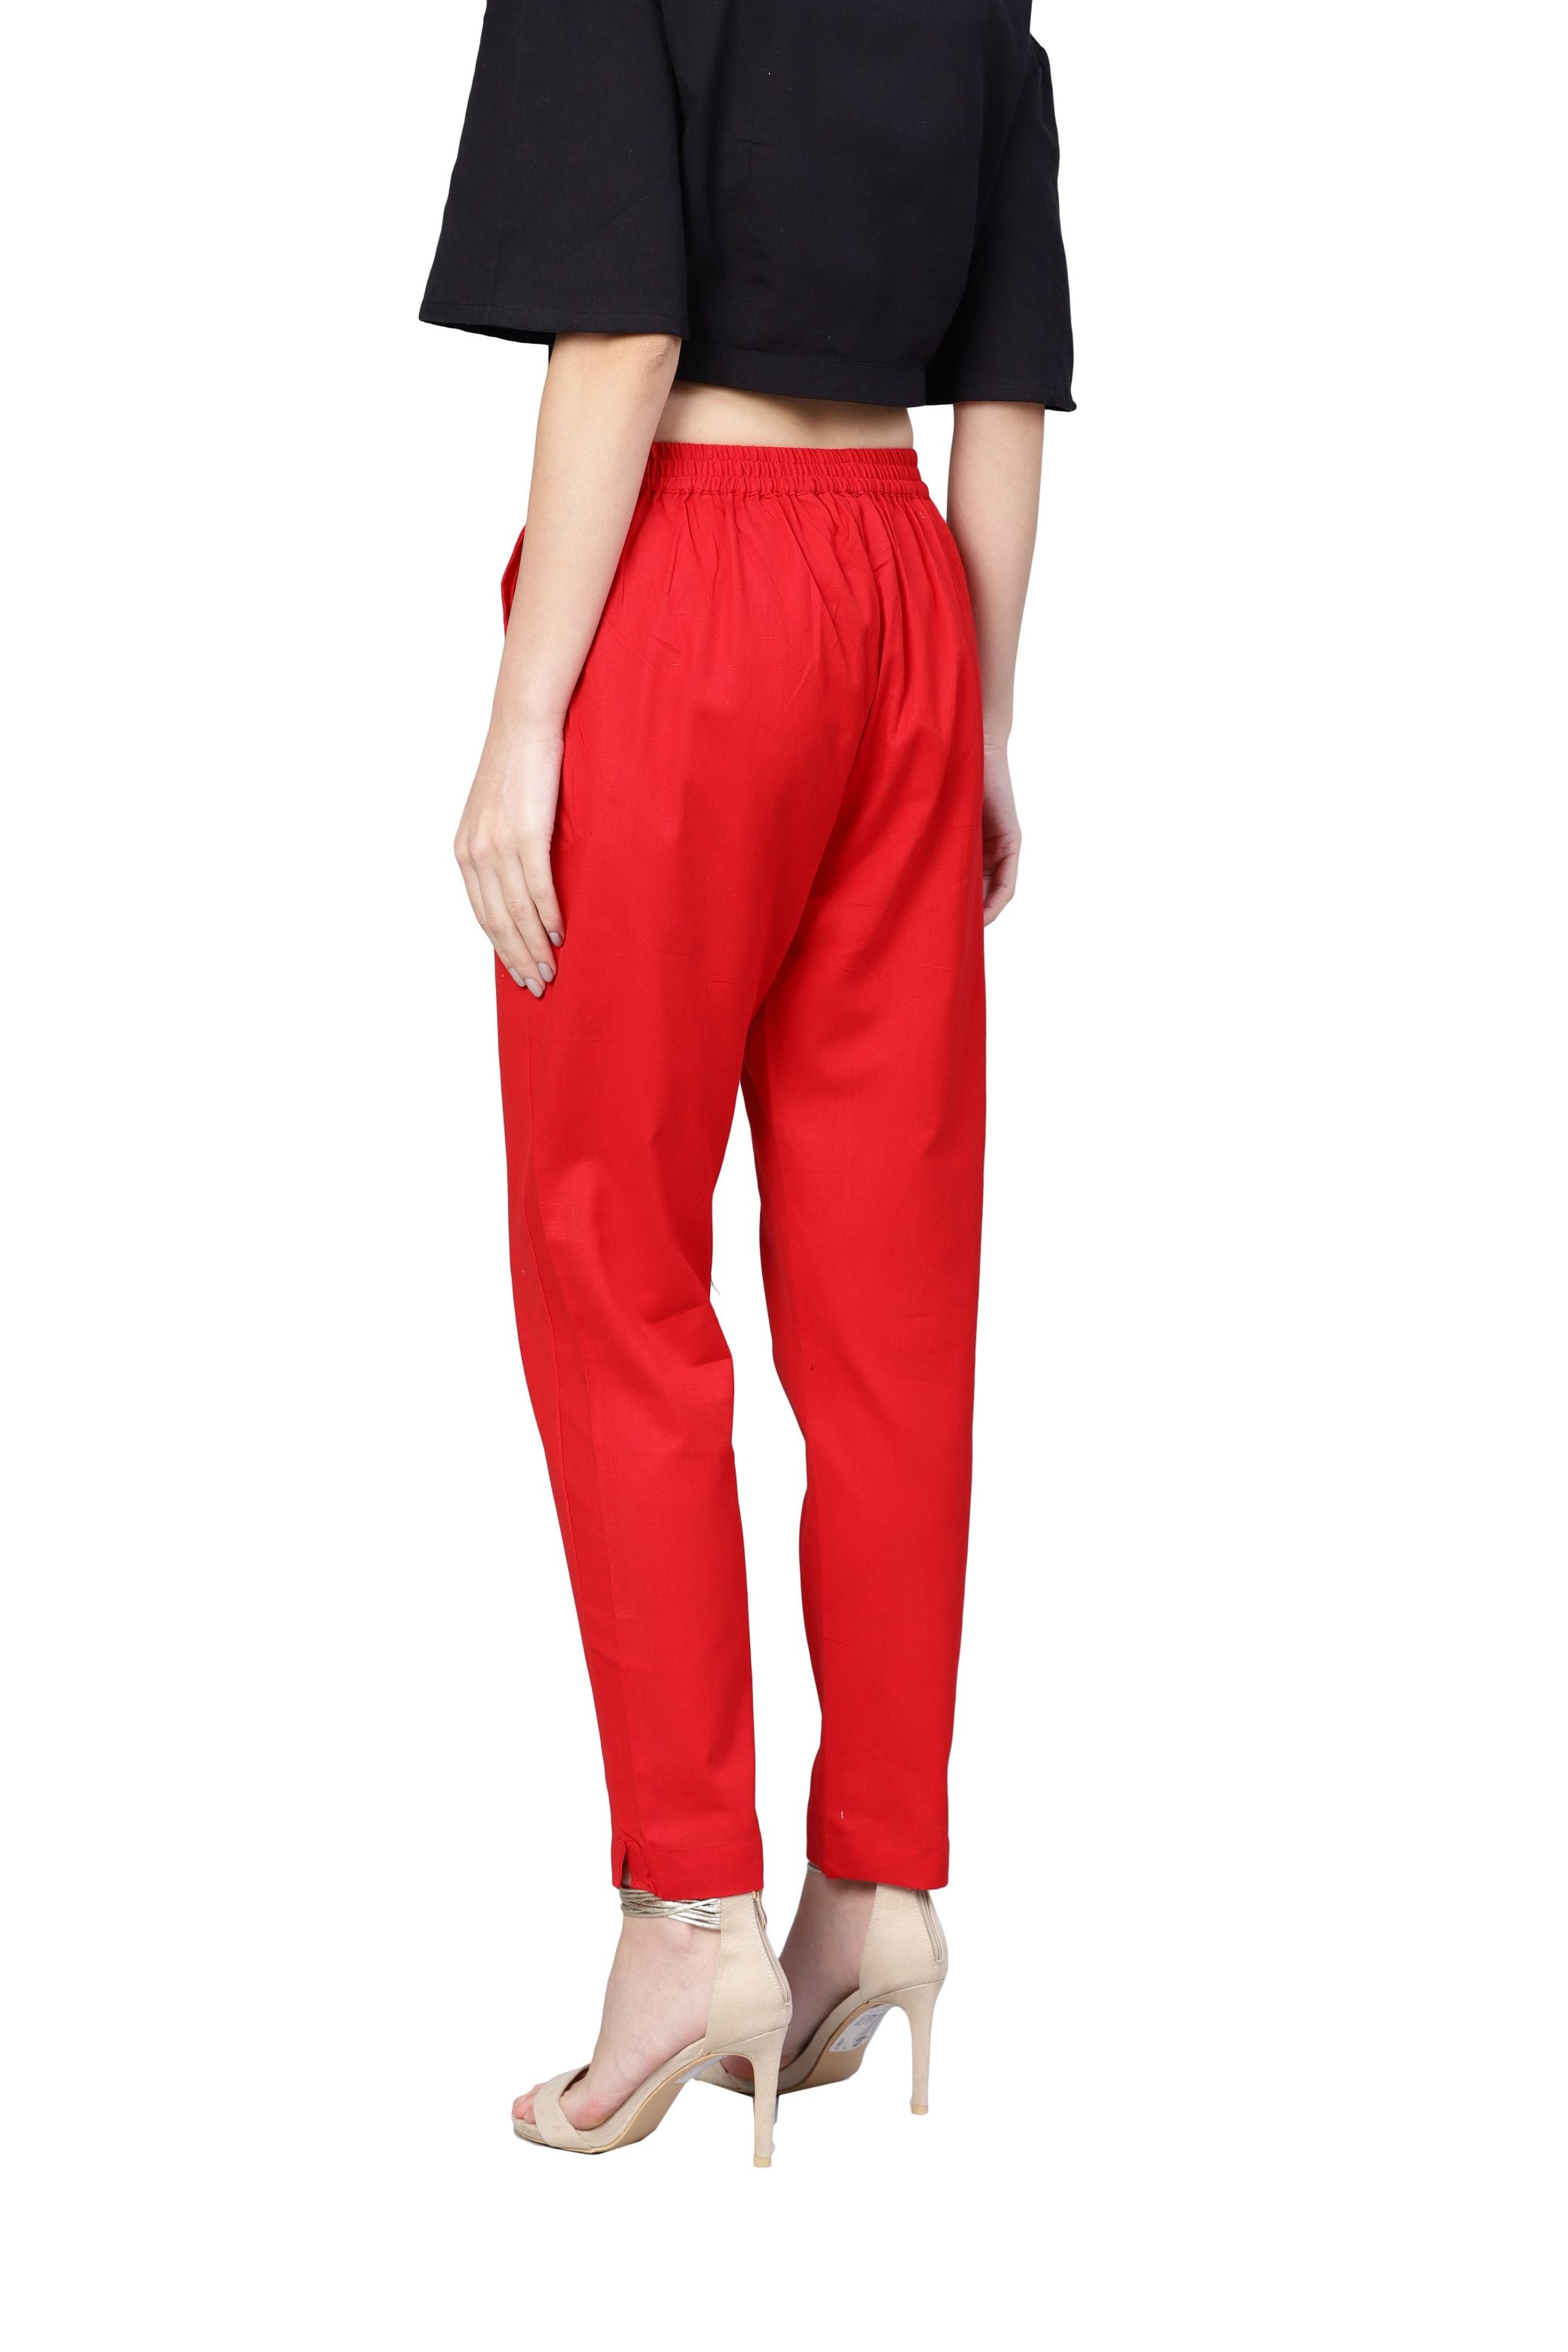 Women Red Cotton Solid Trouser by Myshka (1 Pc Set)